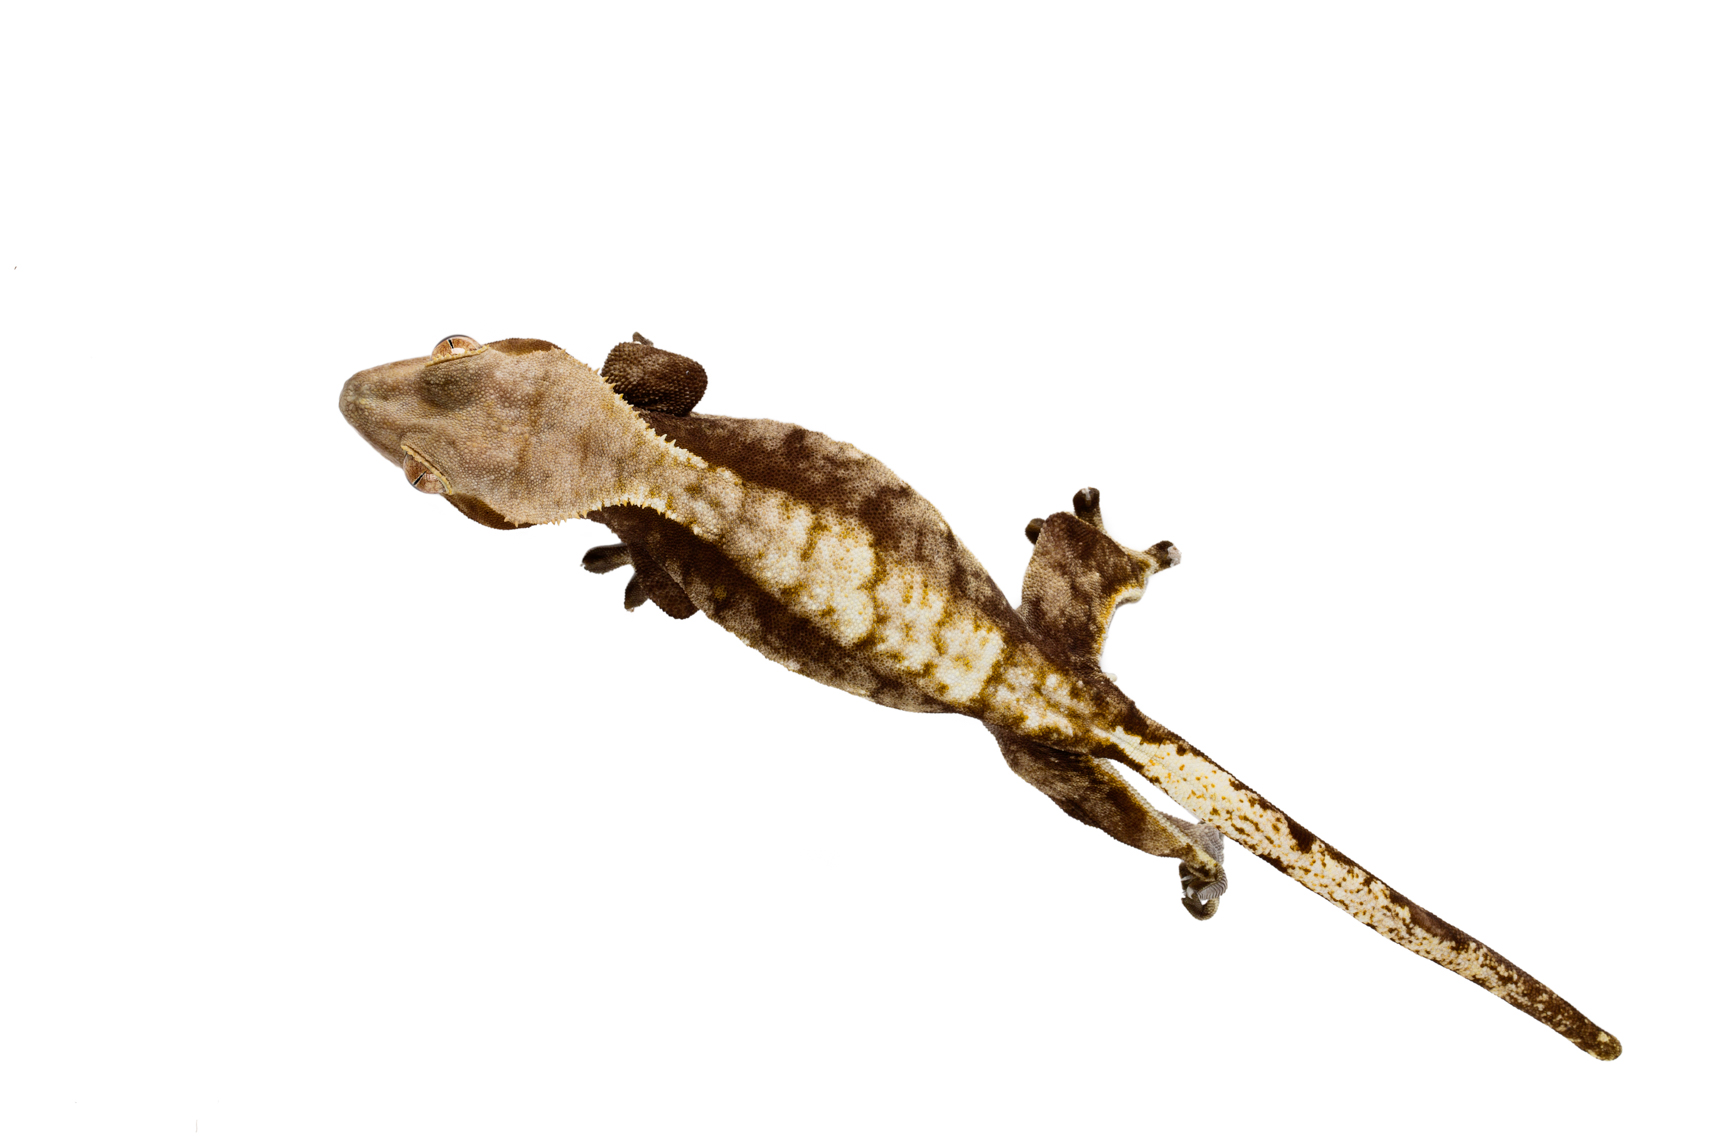 Crested Gecko on white